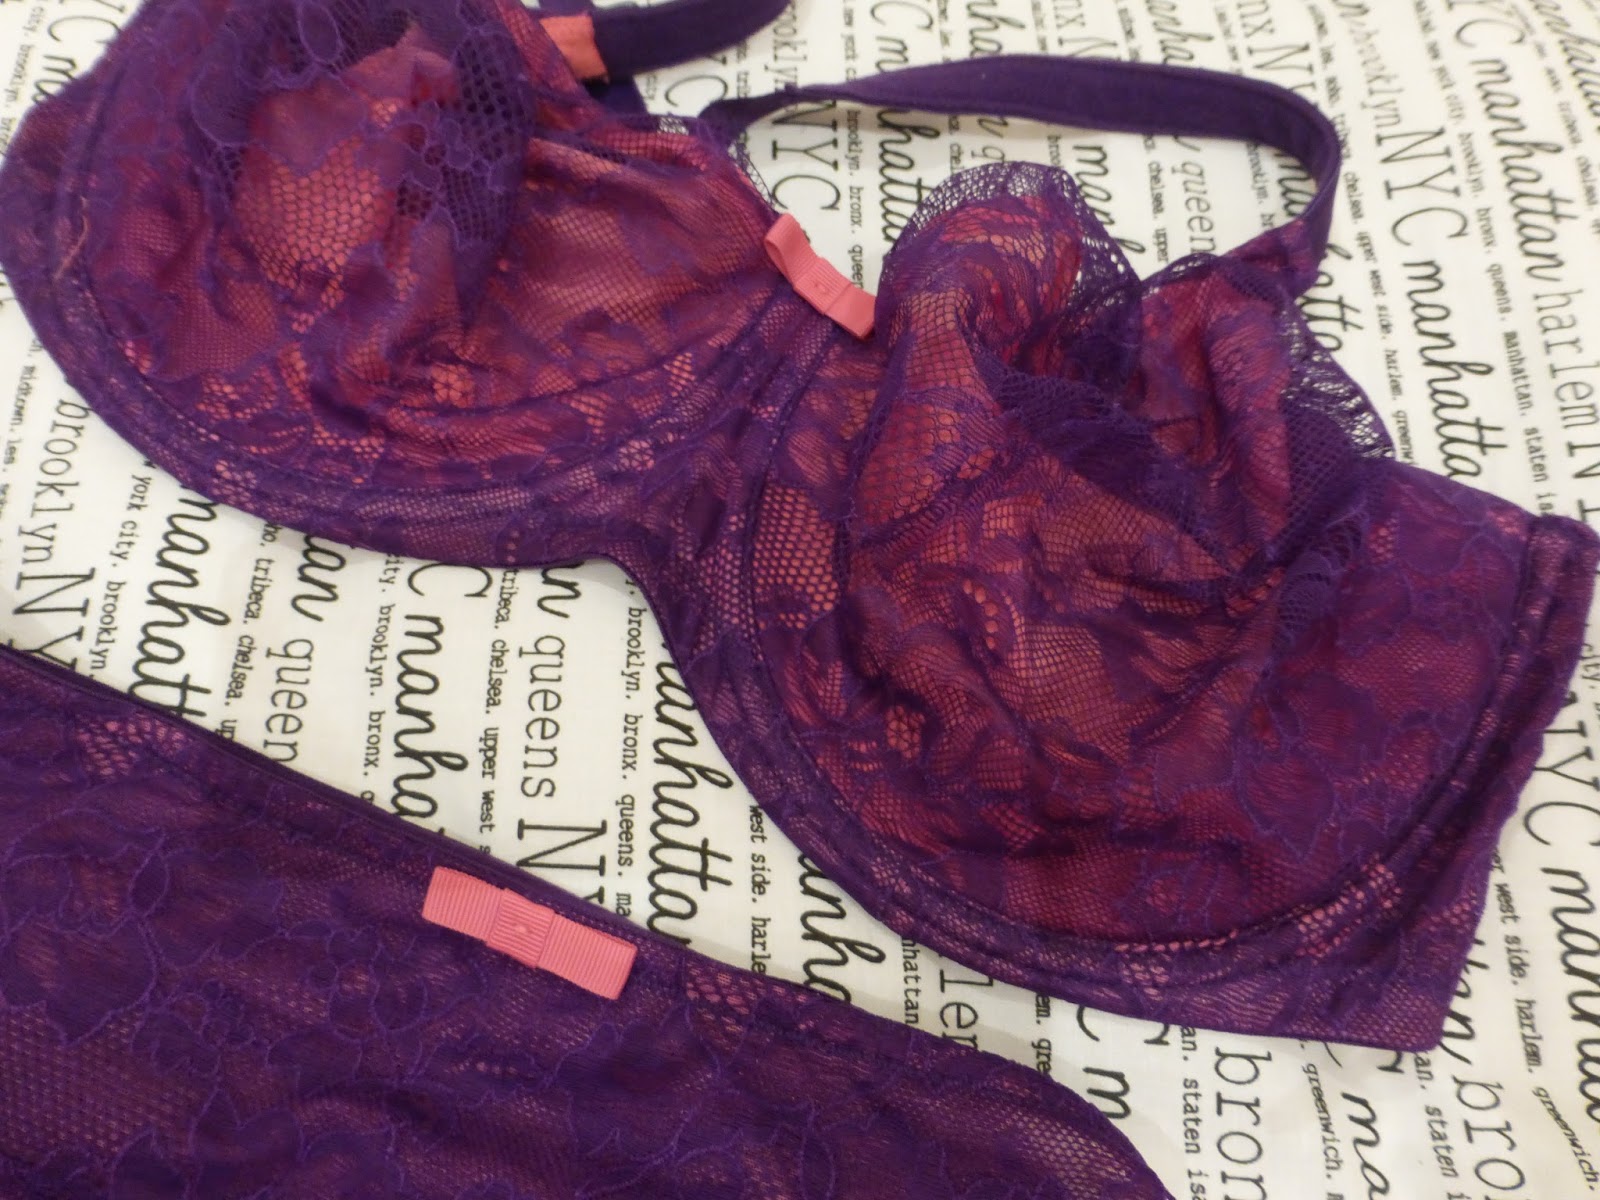 Sculptresse Bras From Panache - She Might Be Loved